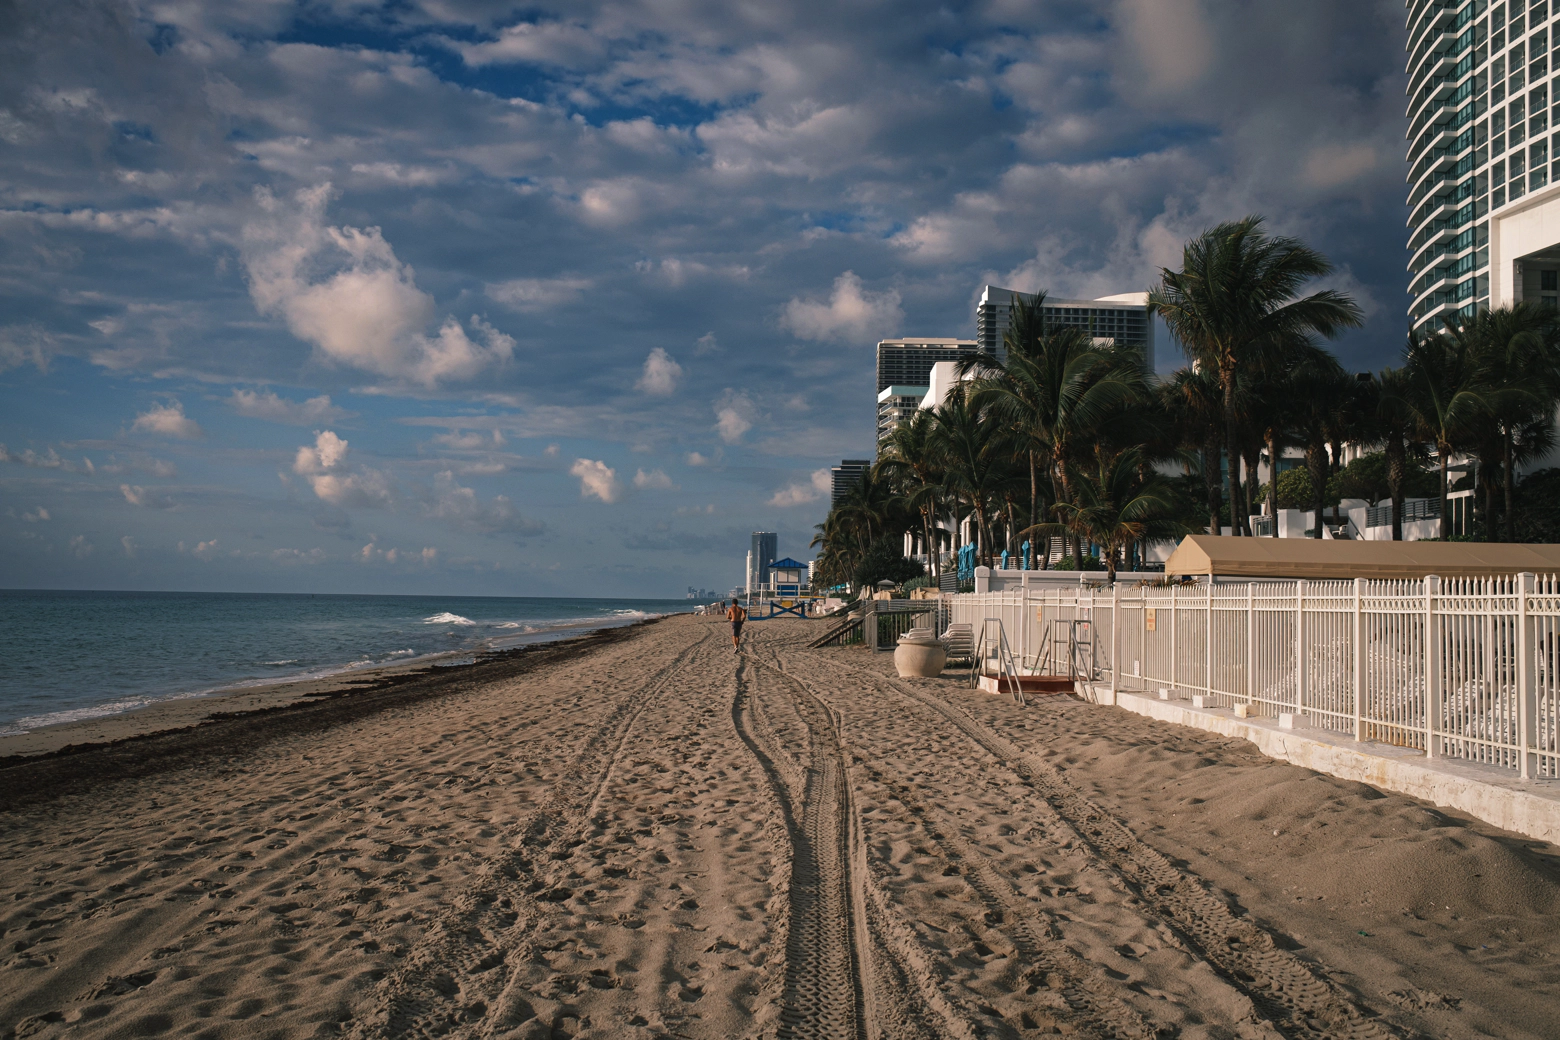 A beach in Florida. Soft clouds. Scratches and footsteps in the sand. A jogger running into the distance.